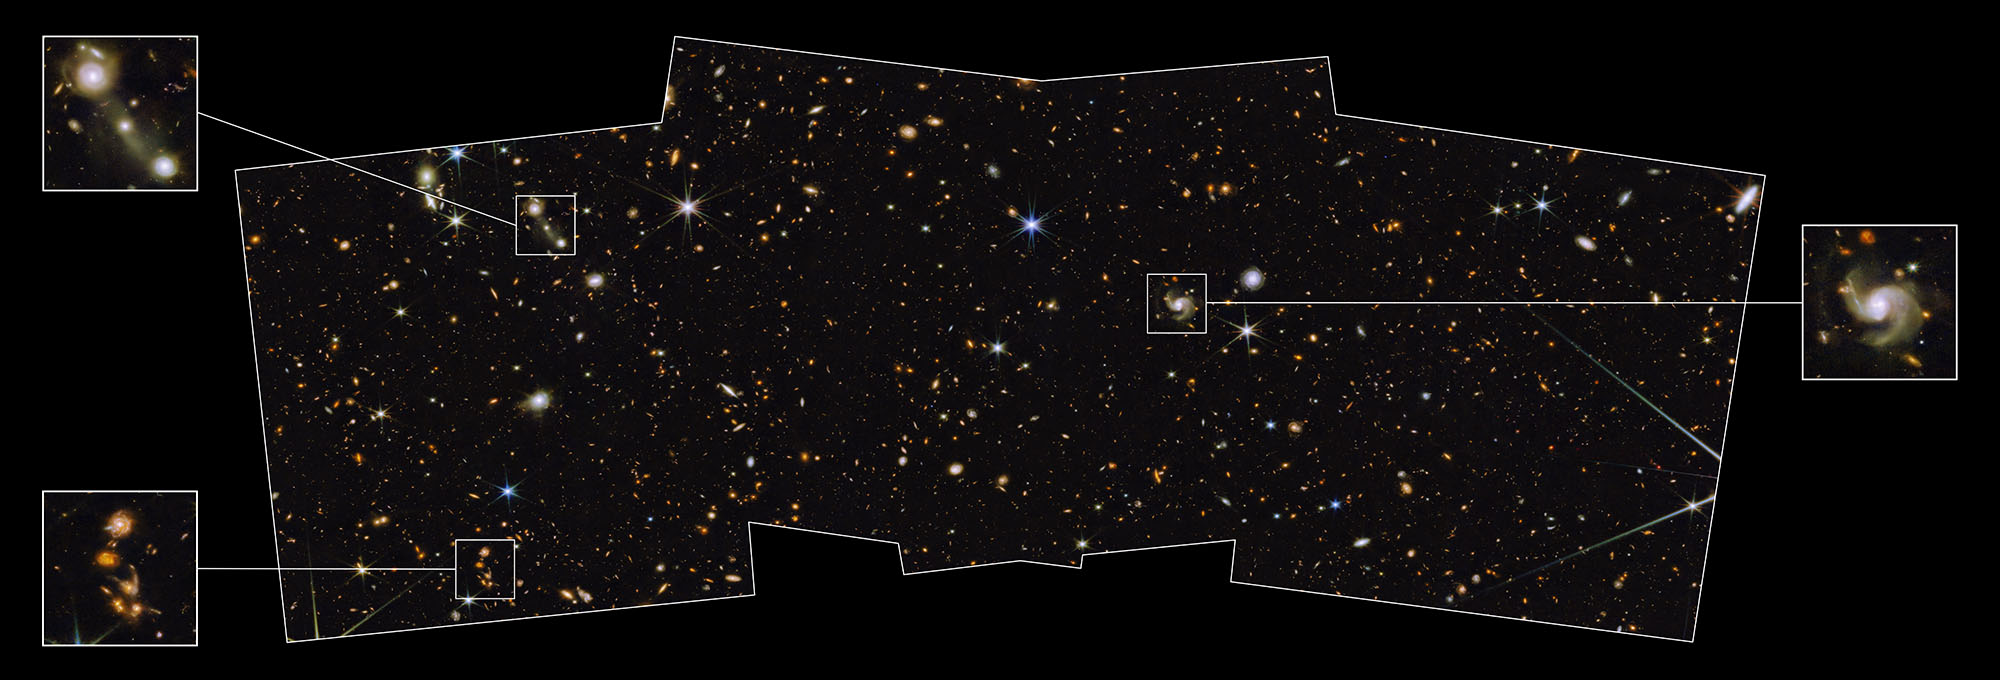 Image of north ecliptic pole shows black field dotted with distant galaxies, spiral and elliptical